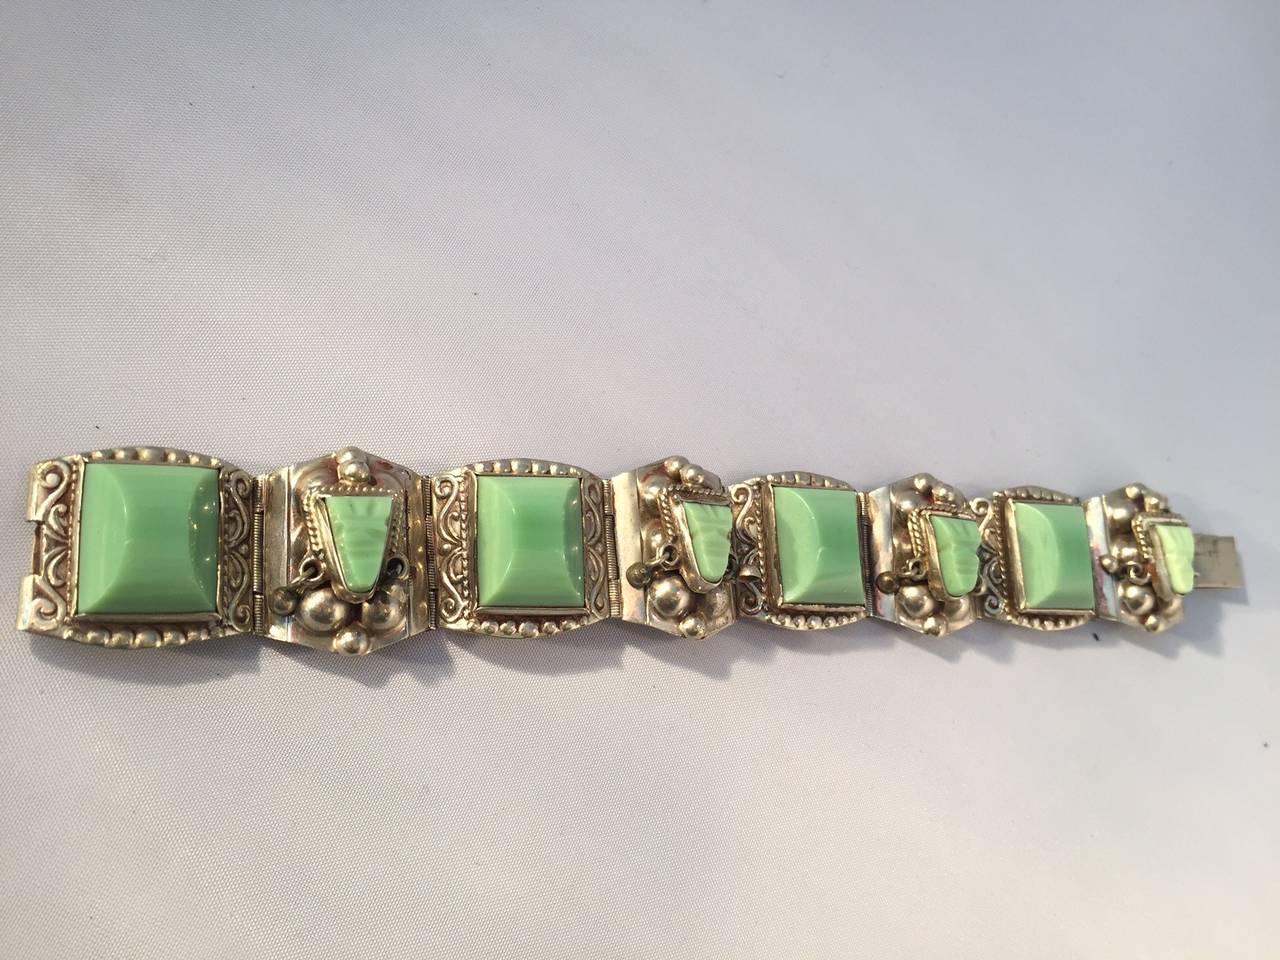 Women's or Men's 1940s Carved Jadeite Glass and Sterling Silver Bracelet from Mexico